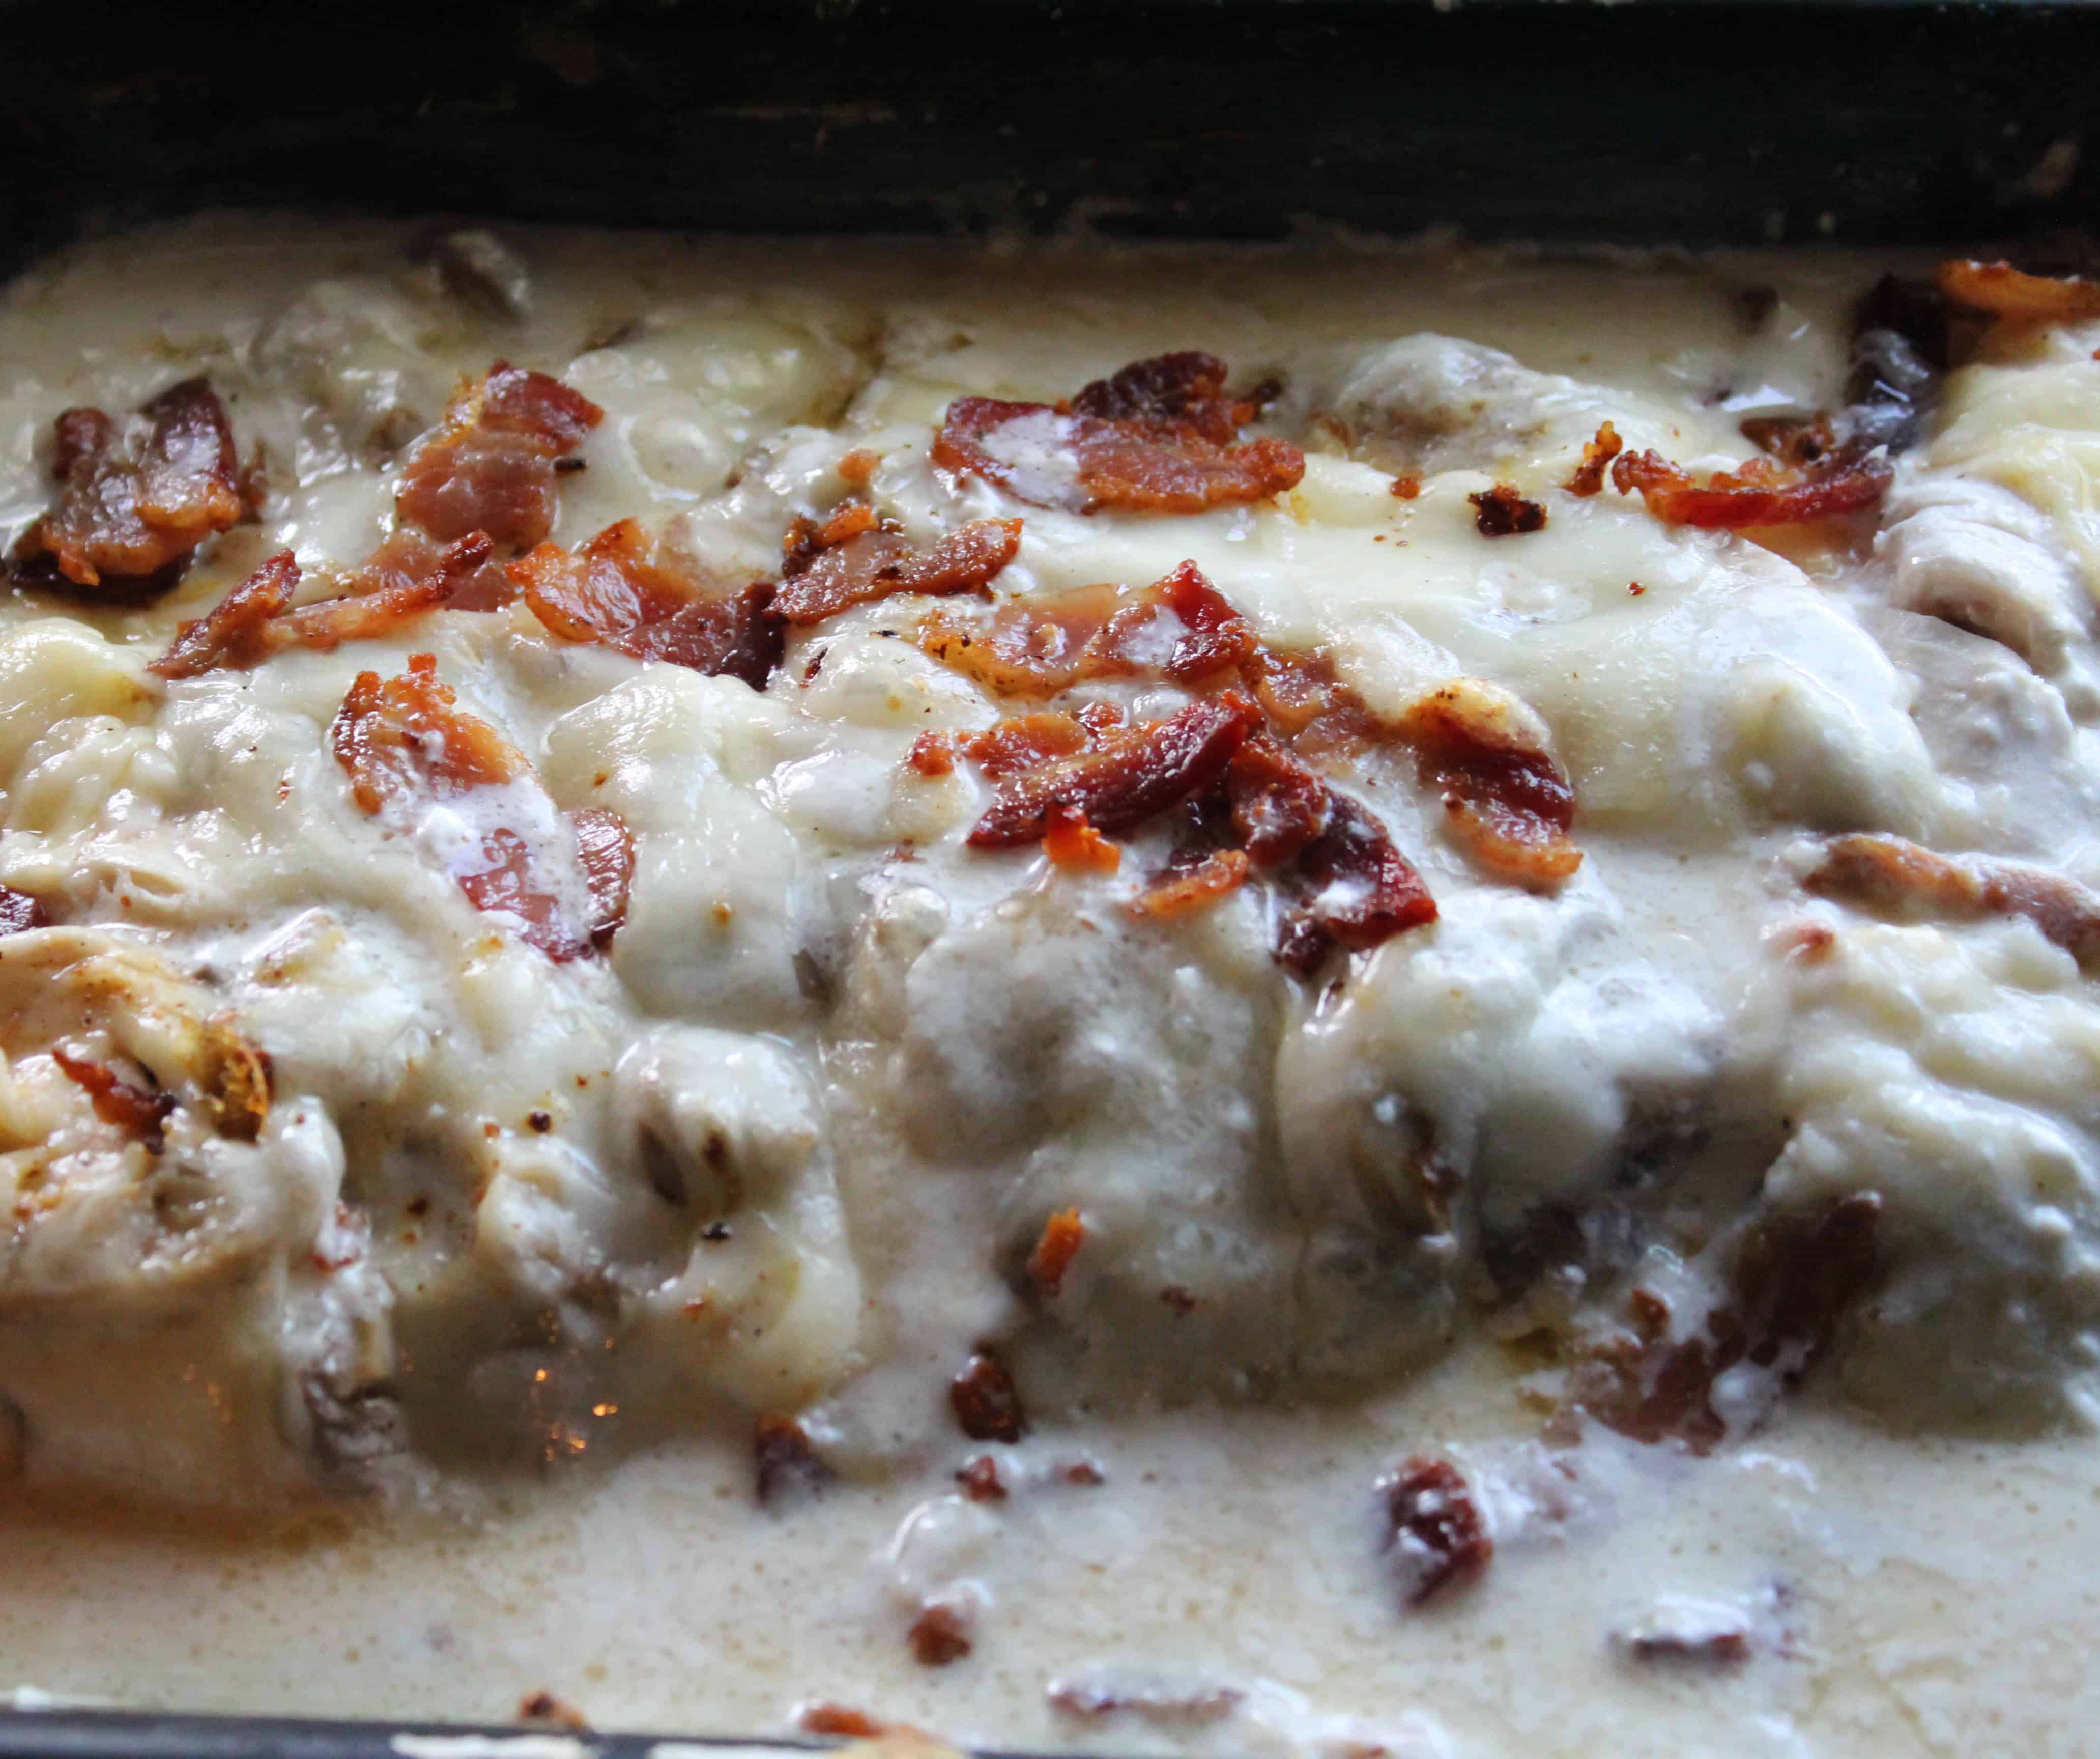 My Creamy Bacon Swiss Chicken Bake is the perfect family-friendly casserole! It features juicy chicken smothered in a creamy sauce. It's THM:S and low-carb.